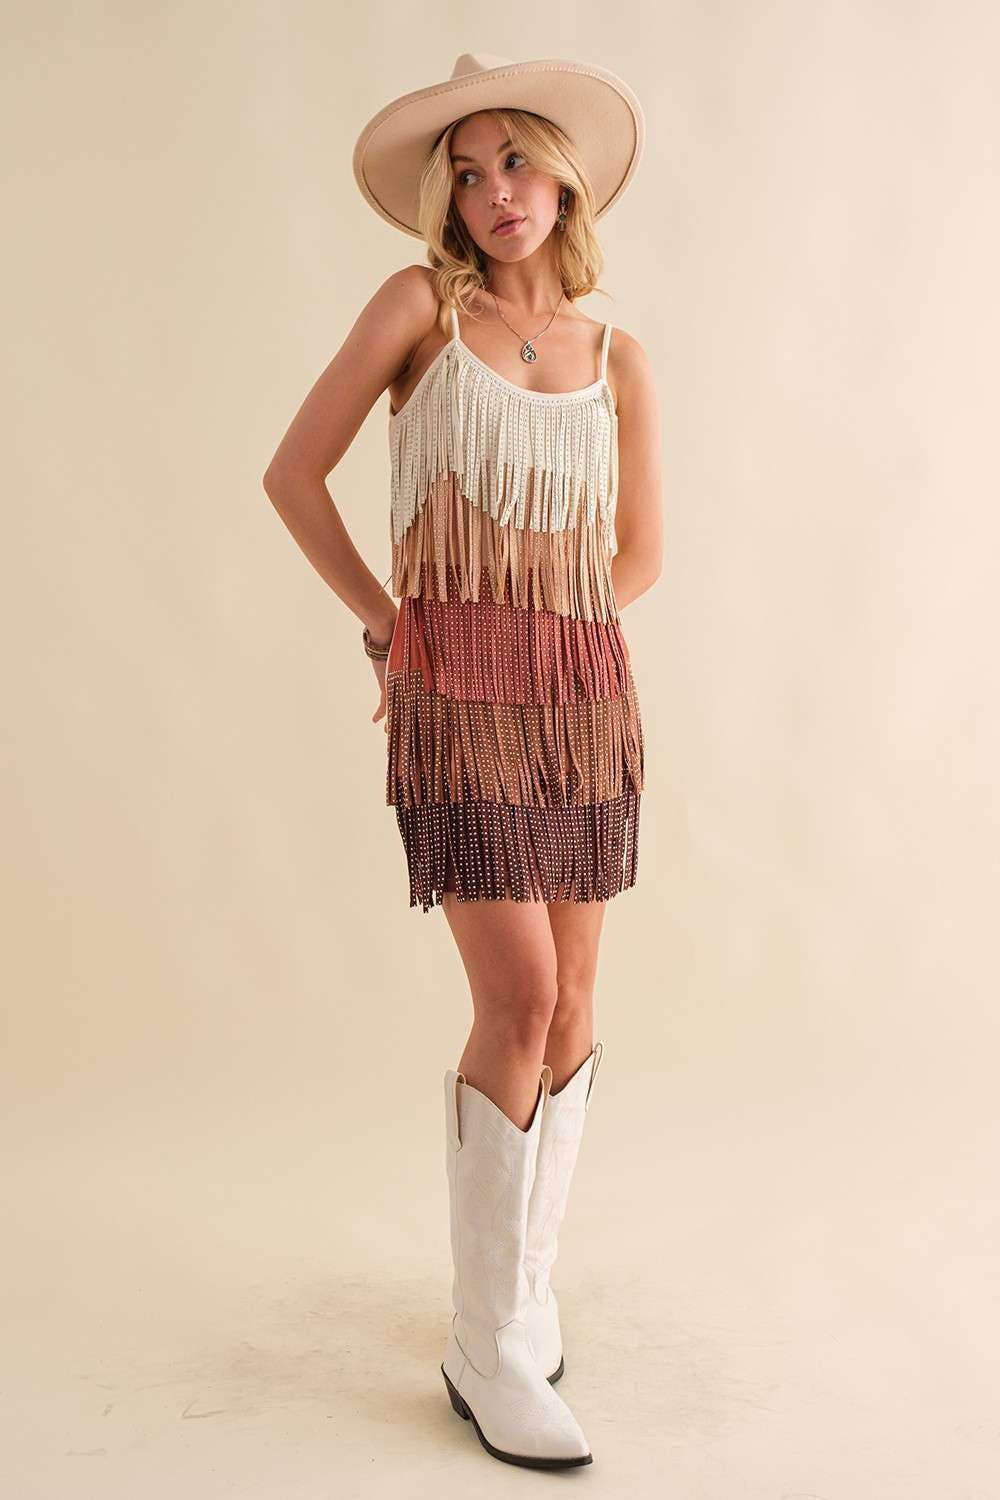 My First Rodeo Suede Fringe Dress